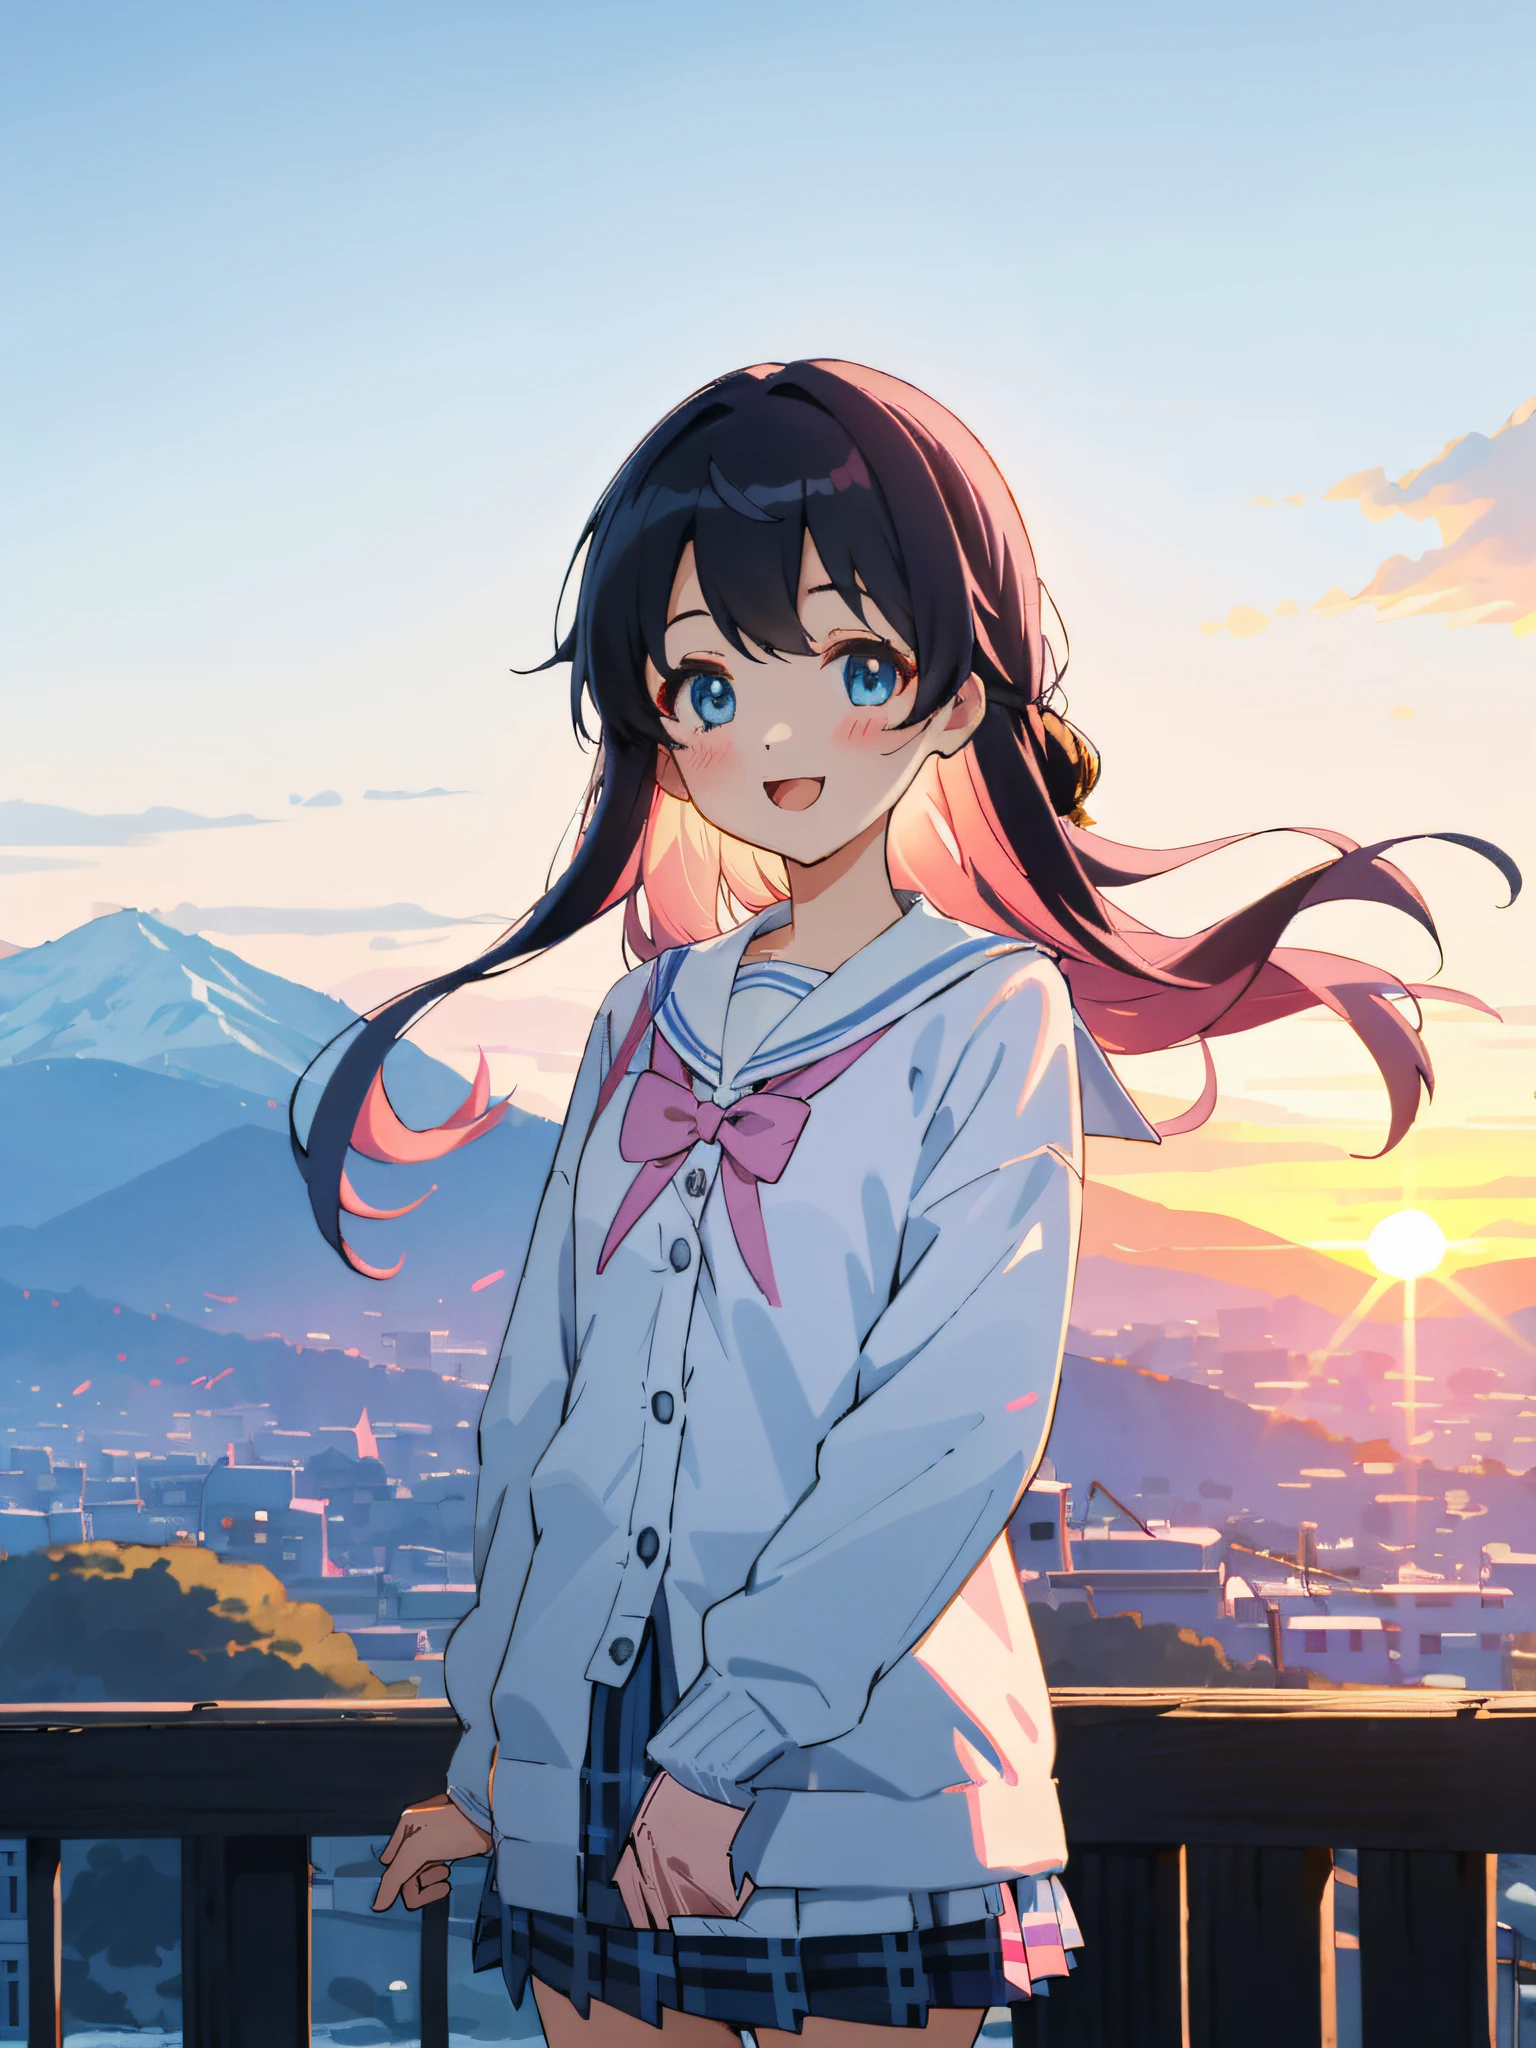 hightquality、Detailed background、Three Beautiful Girls、kawaii hair style、Cute hair colors、Cute colored sailor suit、white sailor collar、Cute plaid pleated skirt、Cute colored school cardigan、Stockings in bright colors、Winter Mountains々々々々、Sunrise from the summit、the morning sun、Smiling、pantie shot